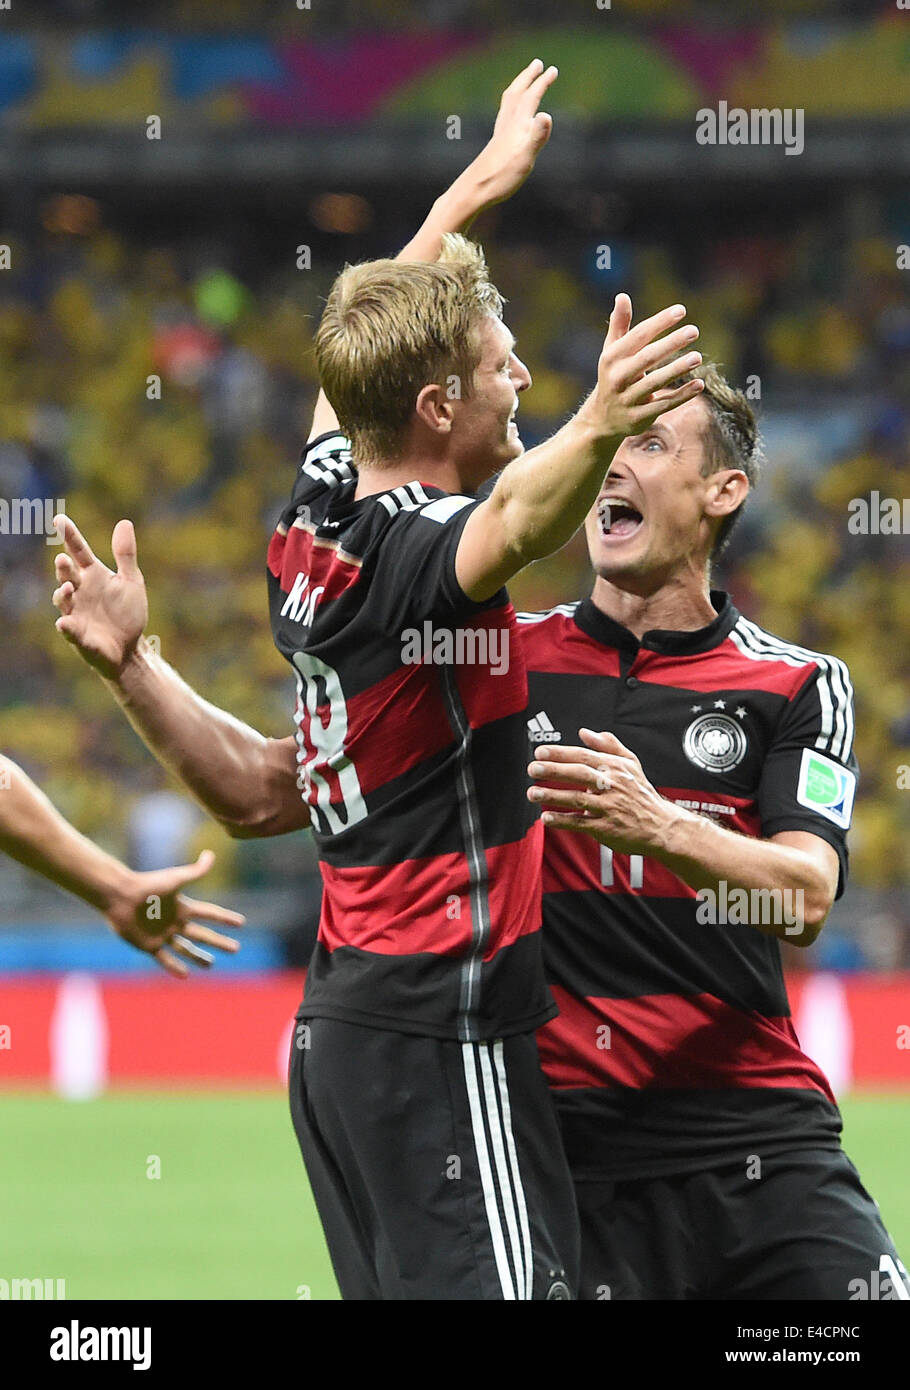 Belo Horizonte, Brazil. 08th July, 2014. Toni Kroos (L) of Germany celebrates with his teammmate Miroslav Klose (R) after scoring 0-3 goal during the FIFA World Cup 2014 semi-final soccer match between Brazil and Germany at Estadio Mineirao in Belo Horizonte, Brazil, 08 July 2014. Photo: Marcus Brandt/dpa/Alamy Live News Stock Photo